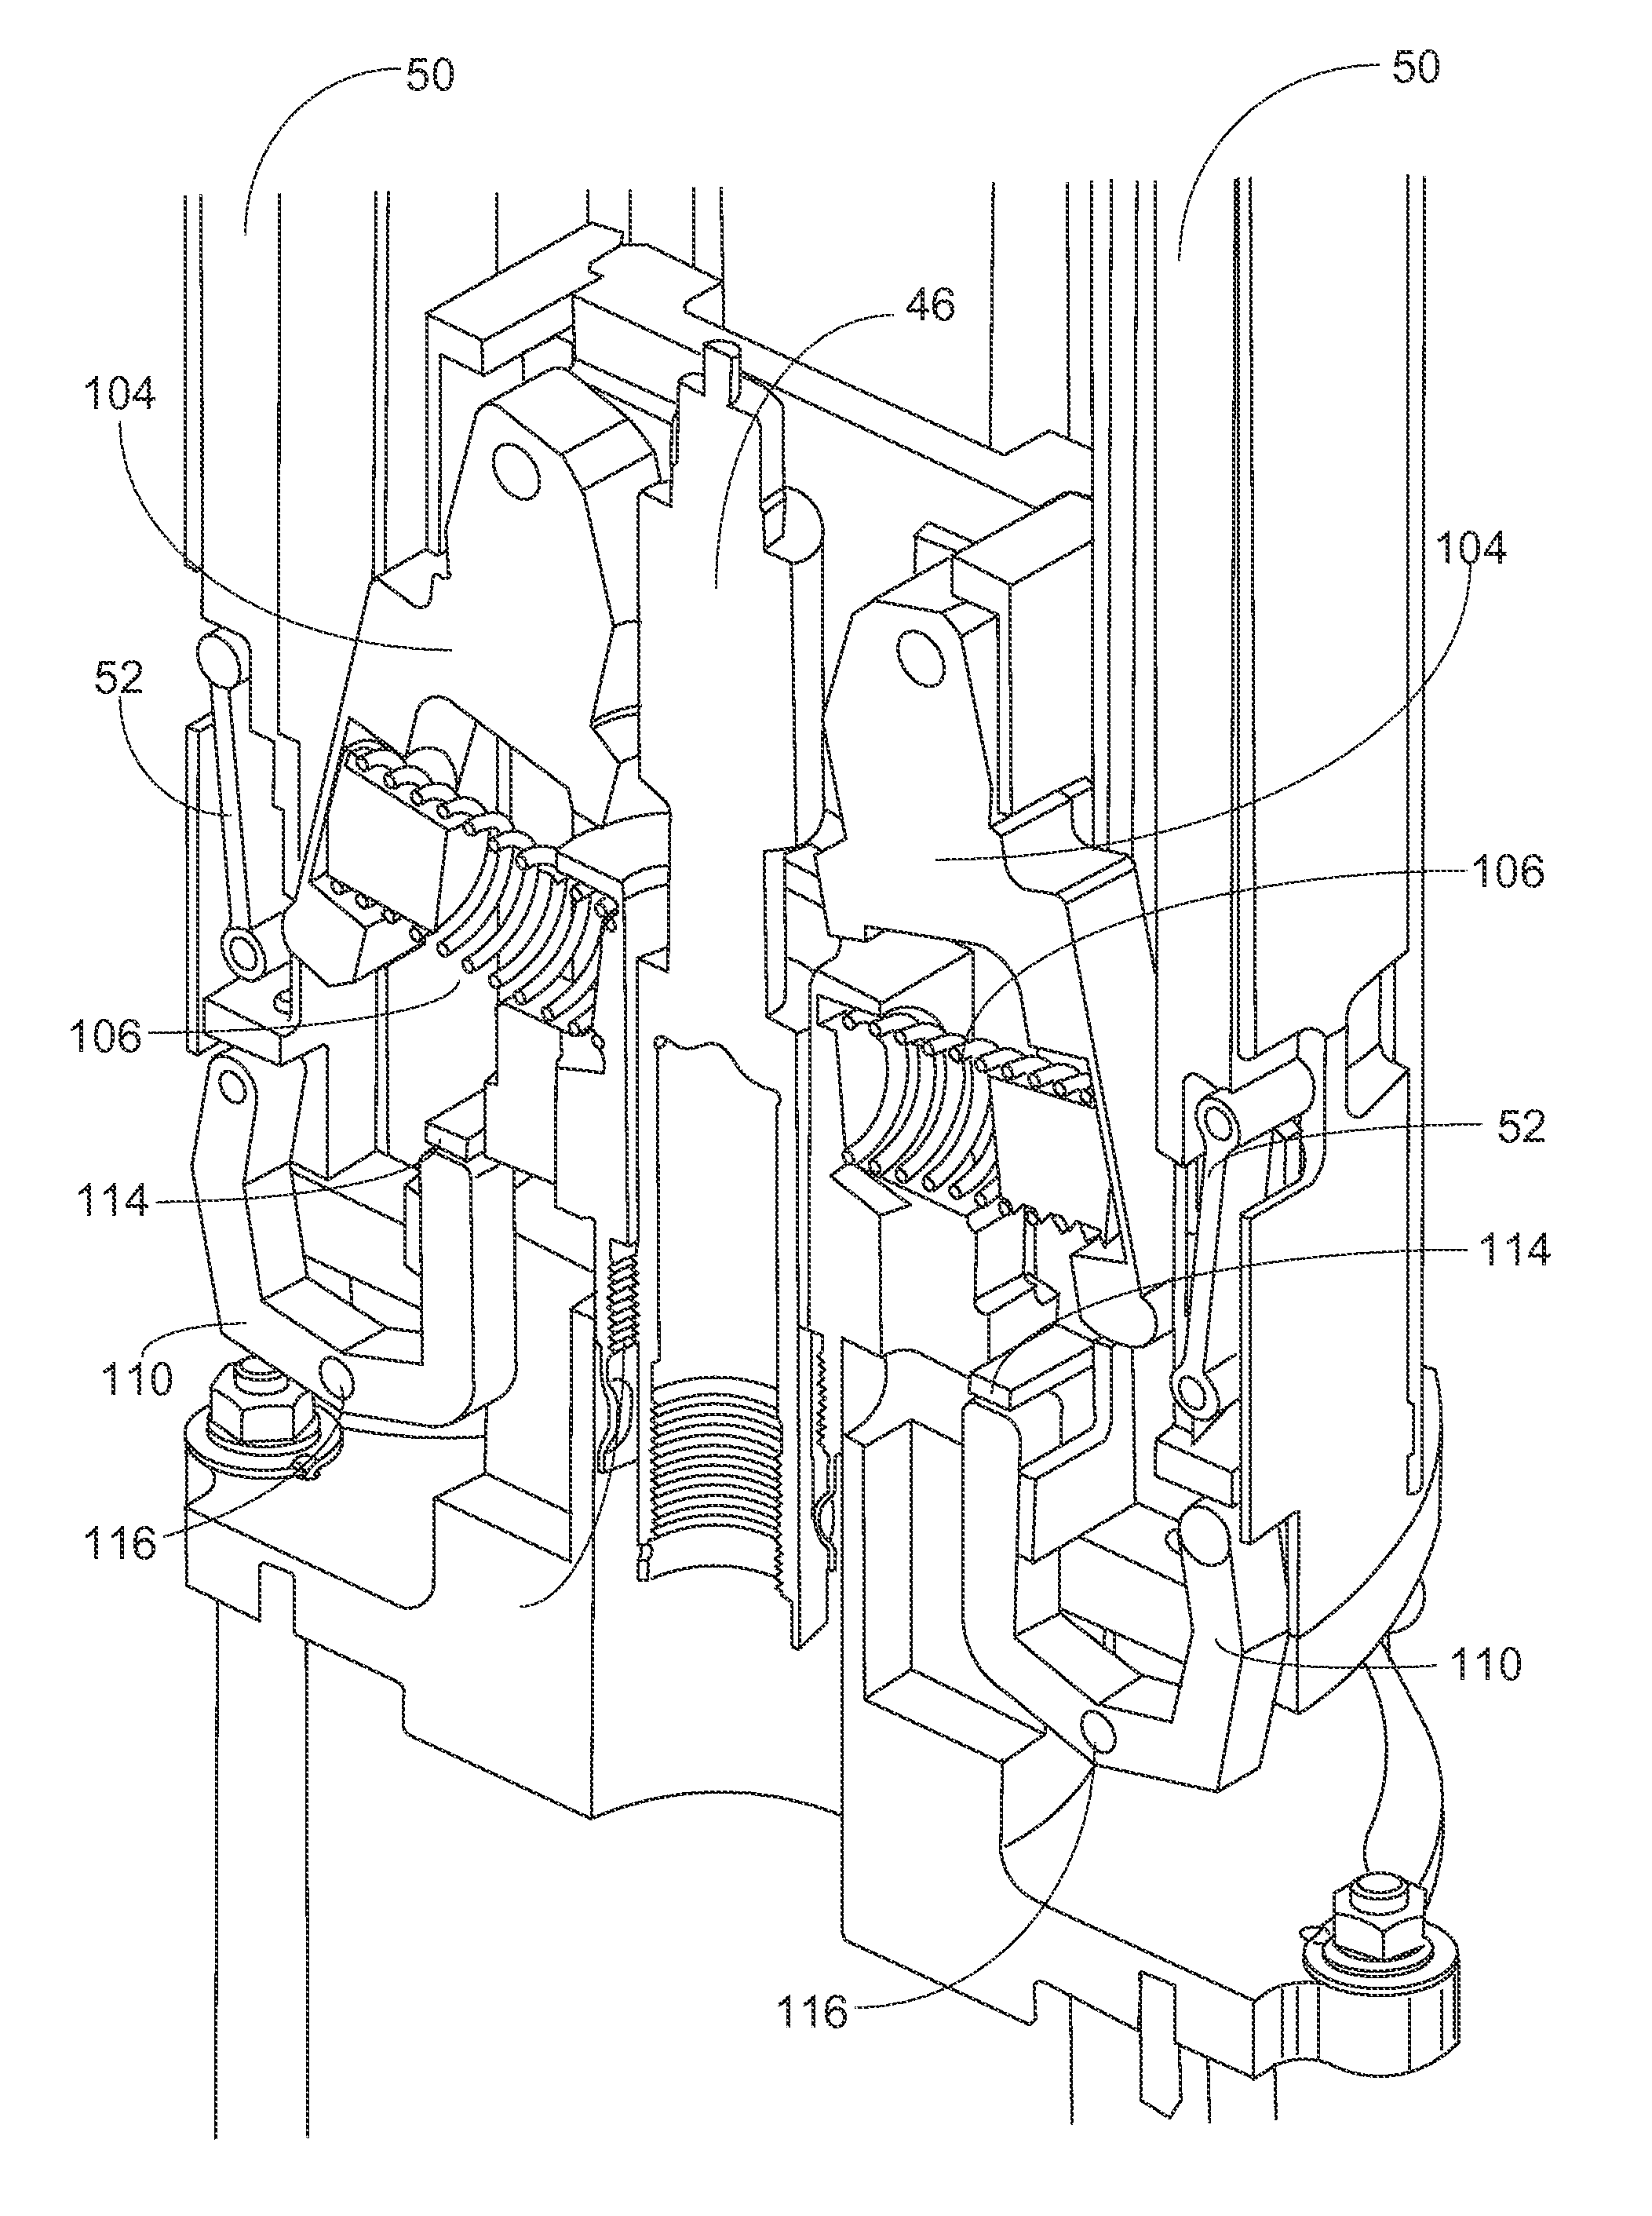 Crdm with separate scram latch engagment and locking